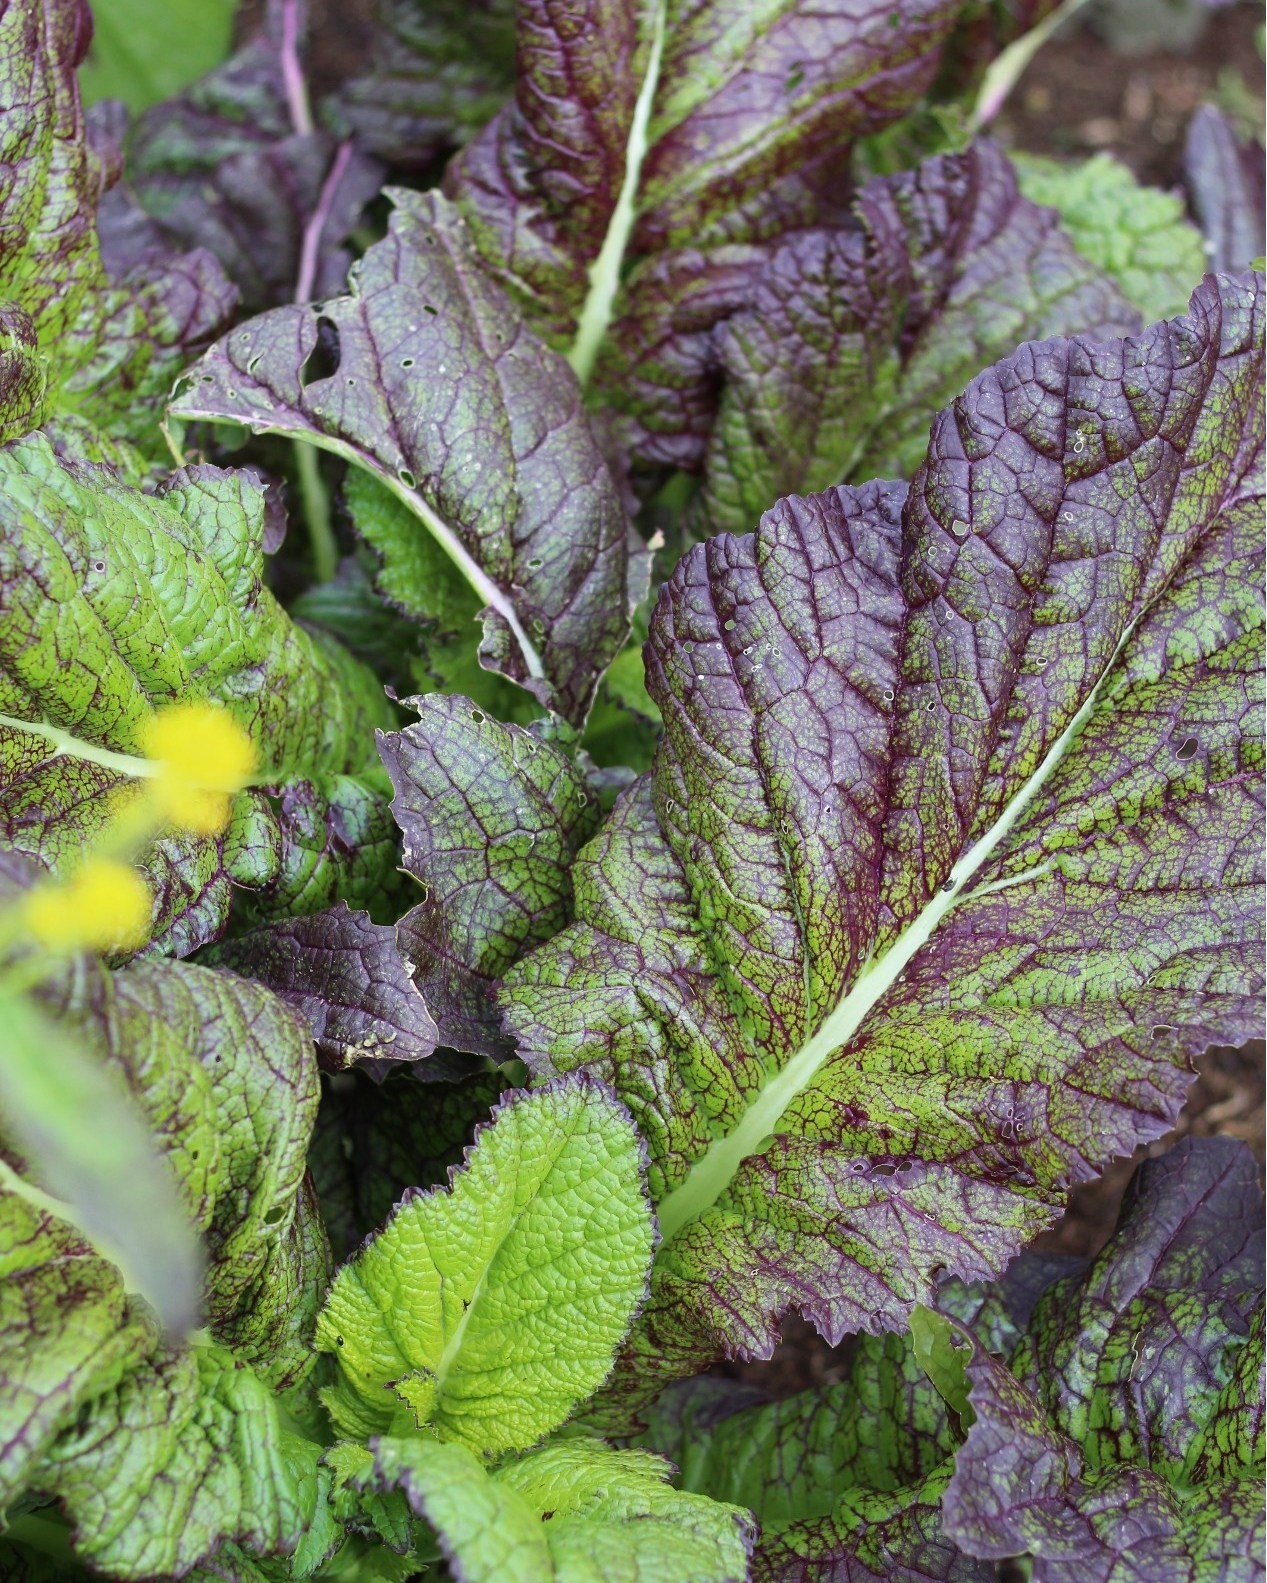 Mustard greens have now gone to seed. But lots more is emerging and the glorious weather has certainly helped! We&rsquo;ve started to open up our box scheme gradually to those on the waiting list. If you want to receive an email once we&rsquo;re read